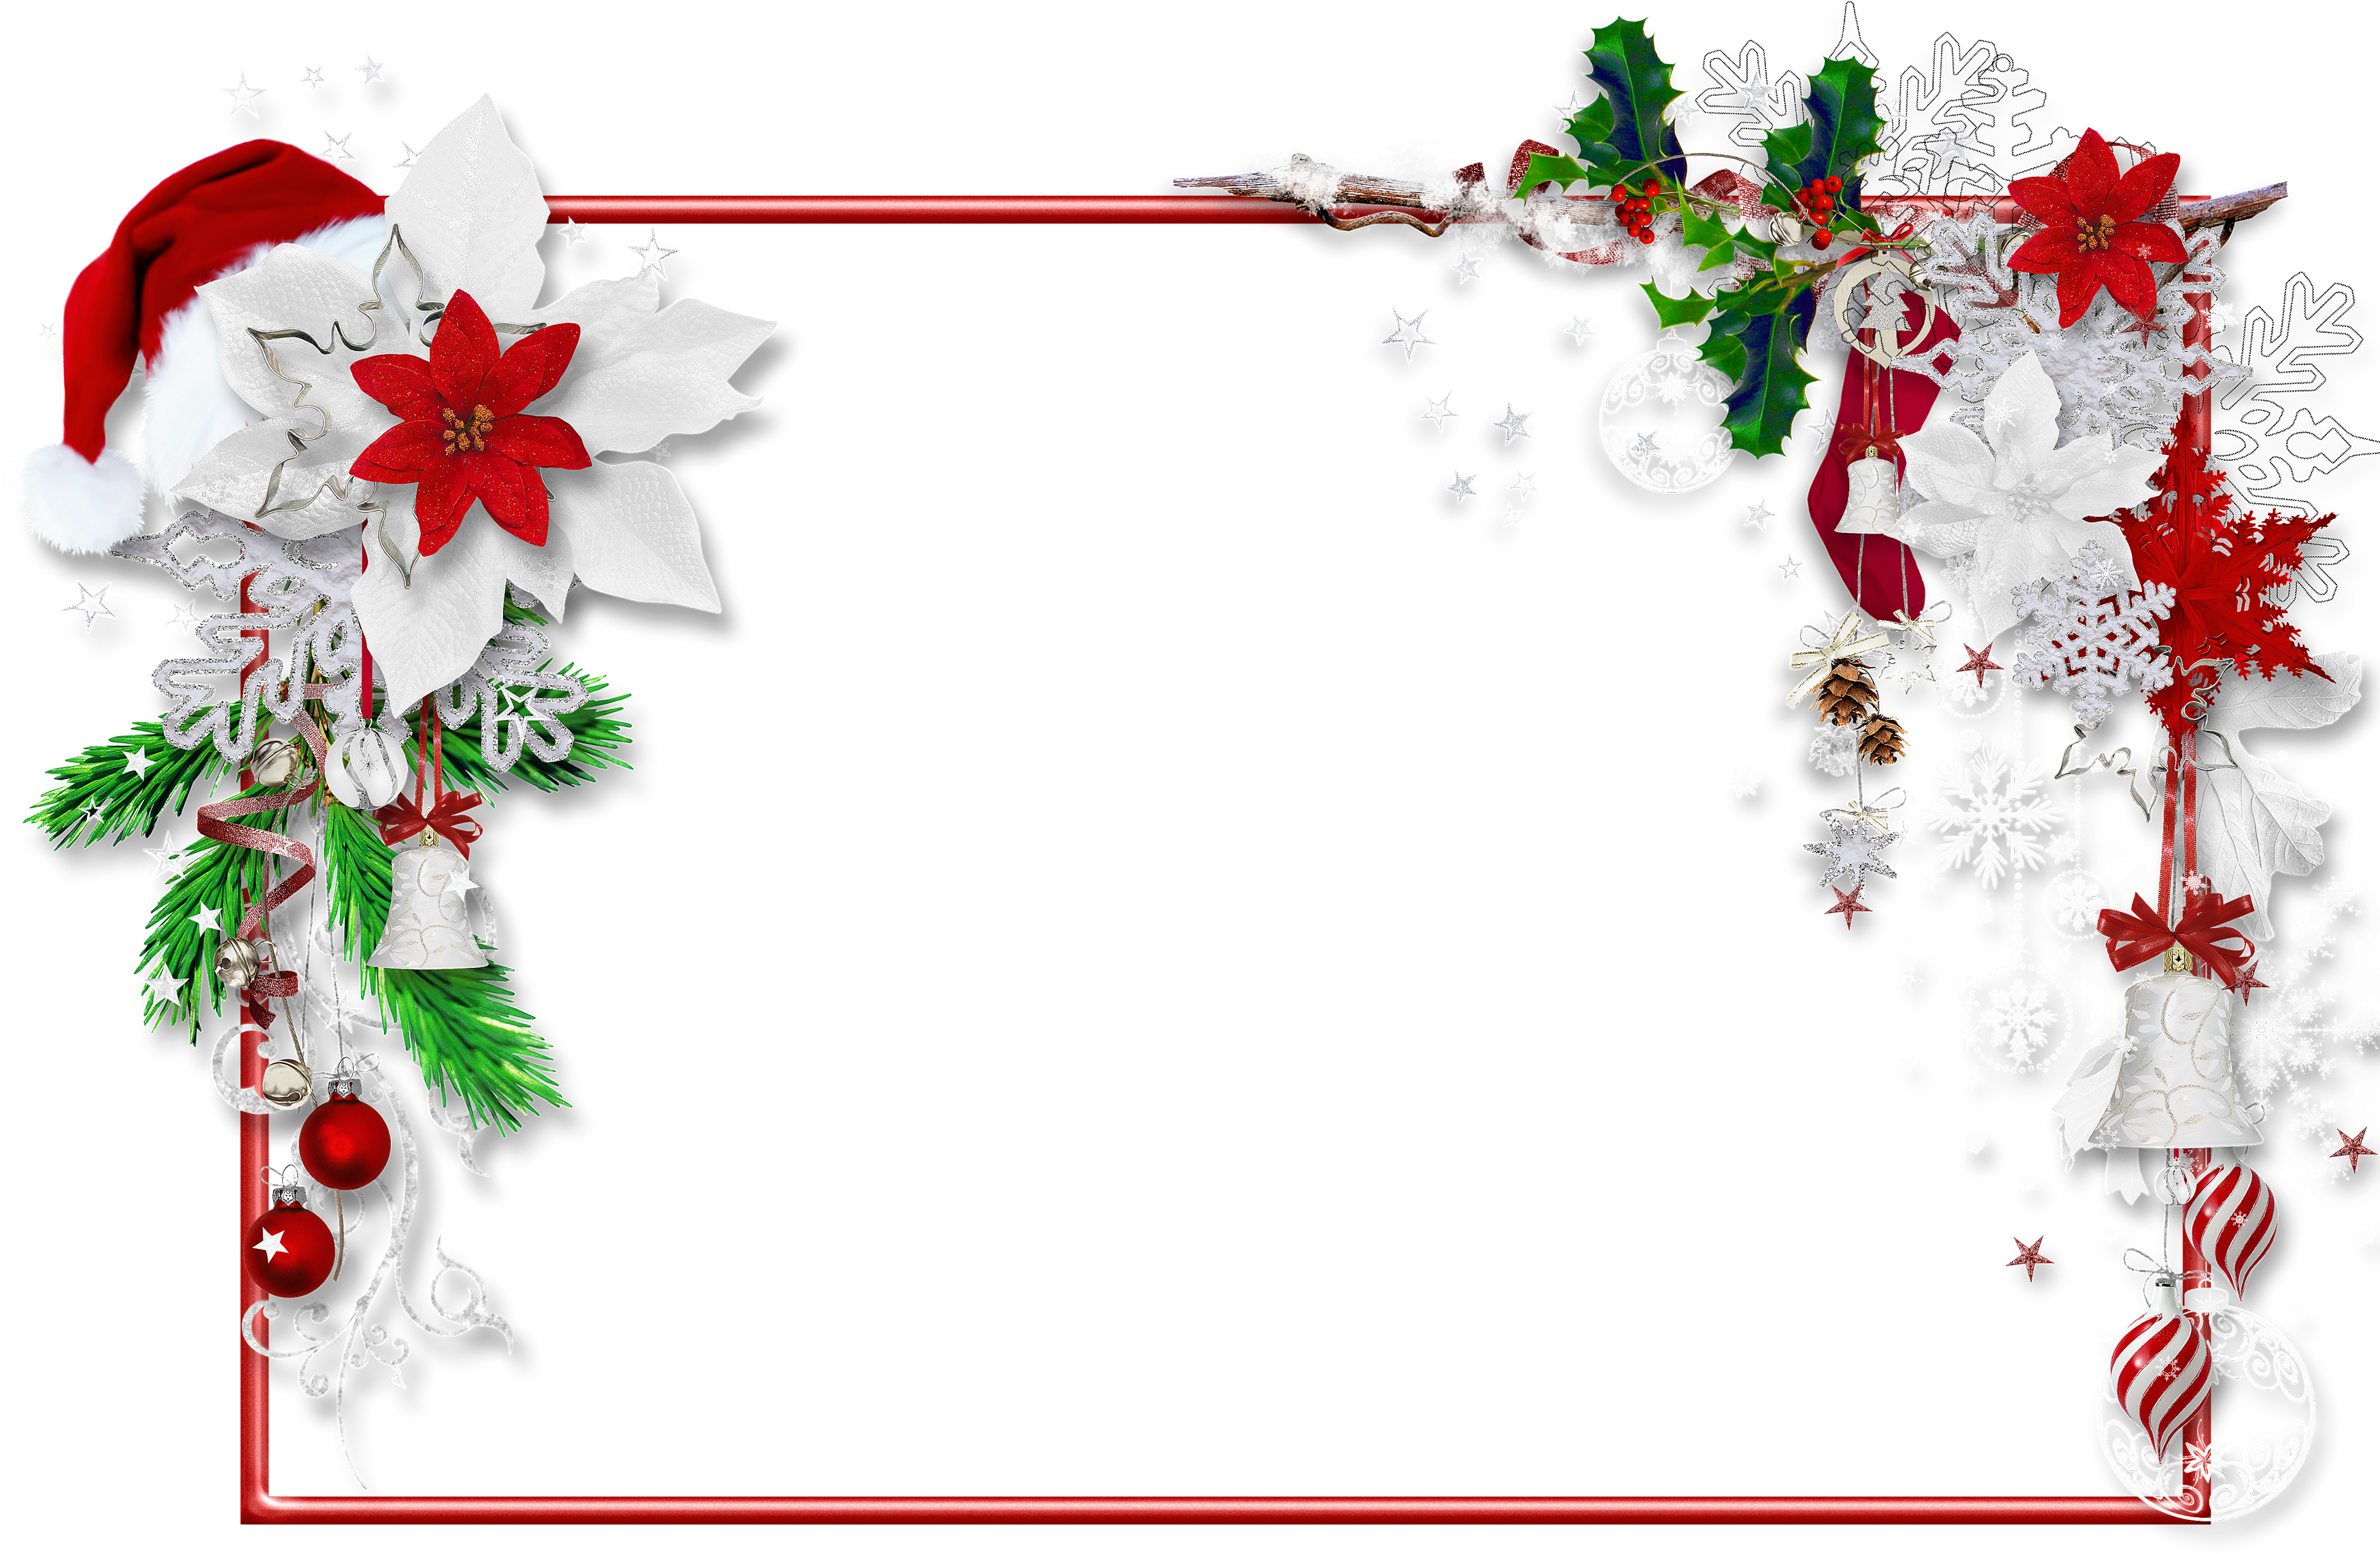 A Black Background With White Flowers And Ornaments